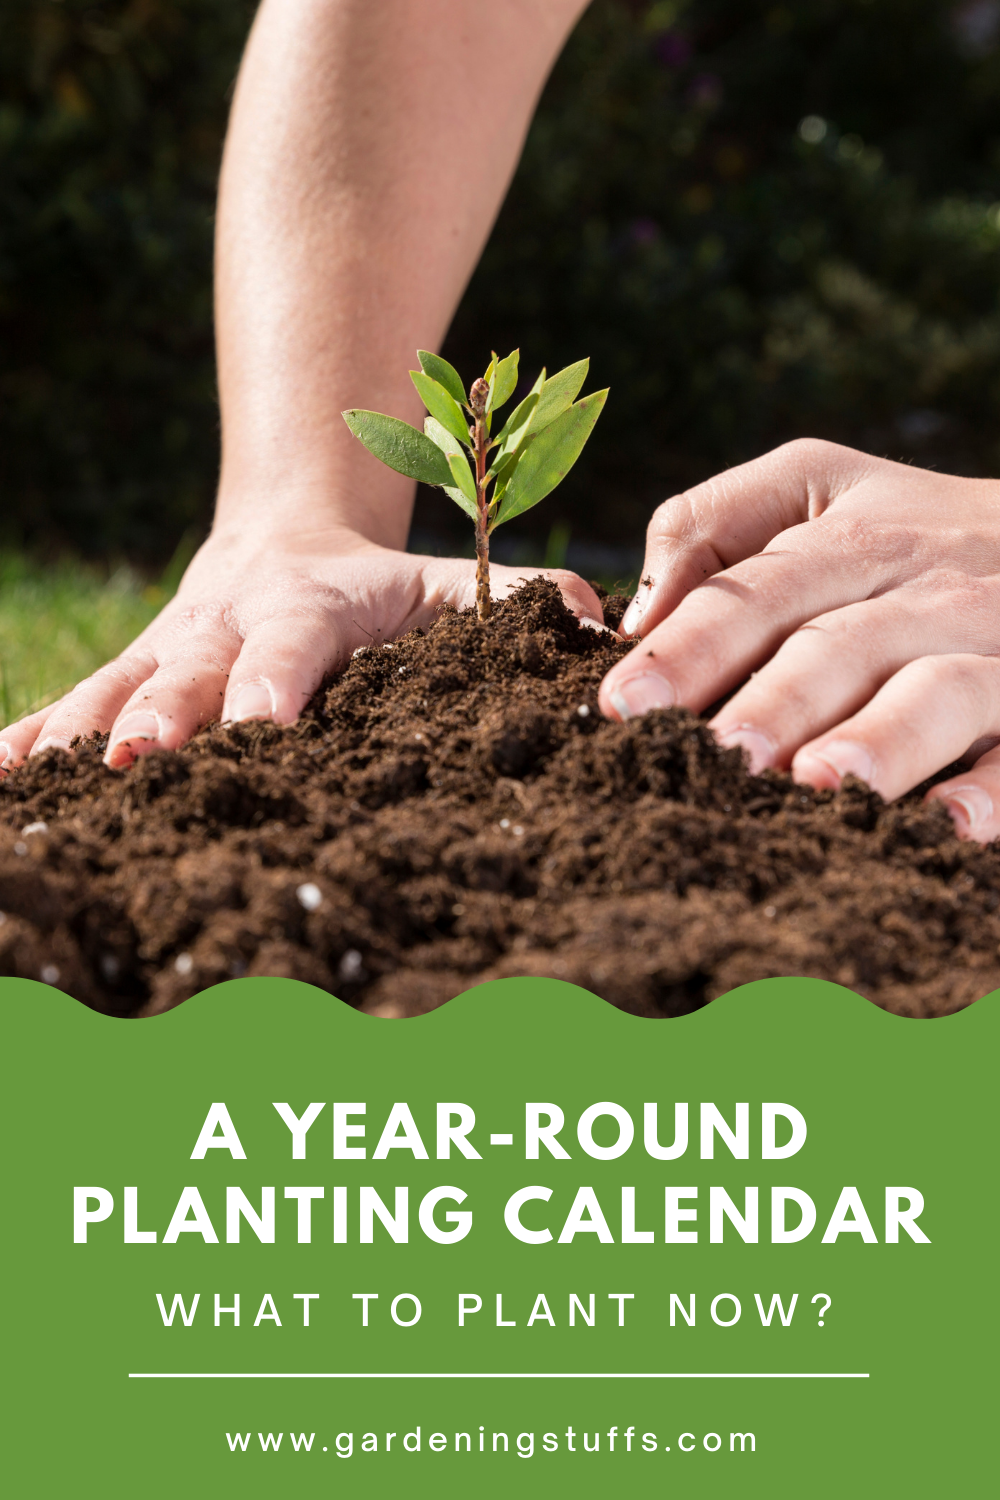 A plants flourish best if planted according to their growing season. In this article, we’ve set up the following month-to-month planting guide to help you plan which species to plant on every month of the year and grow a flourishing garden across all seasons.